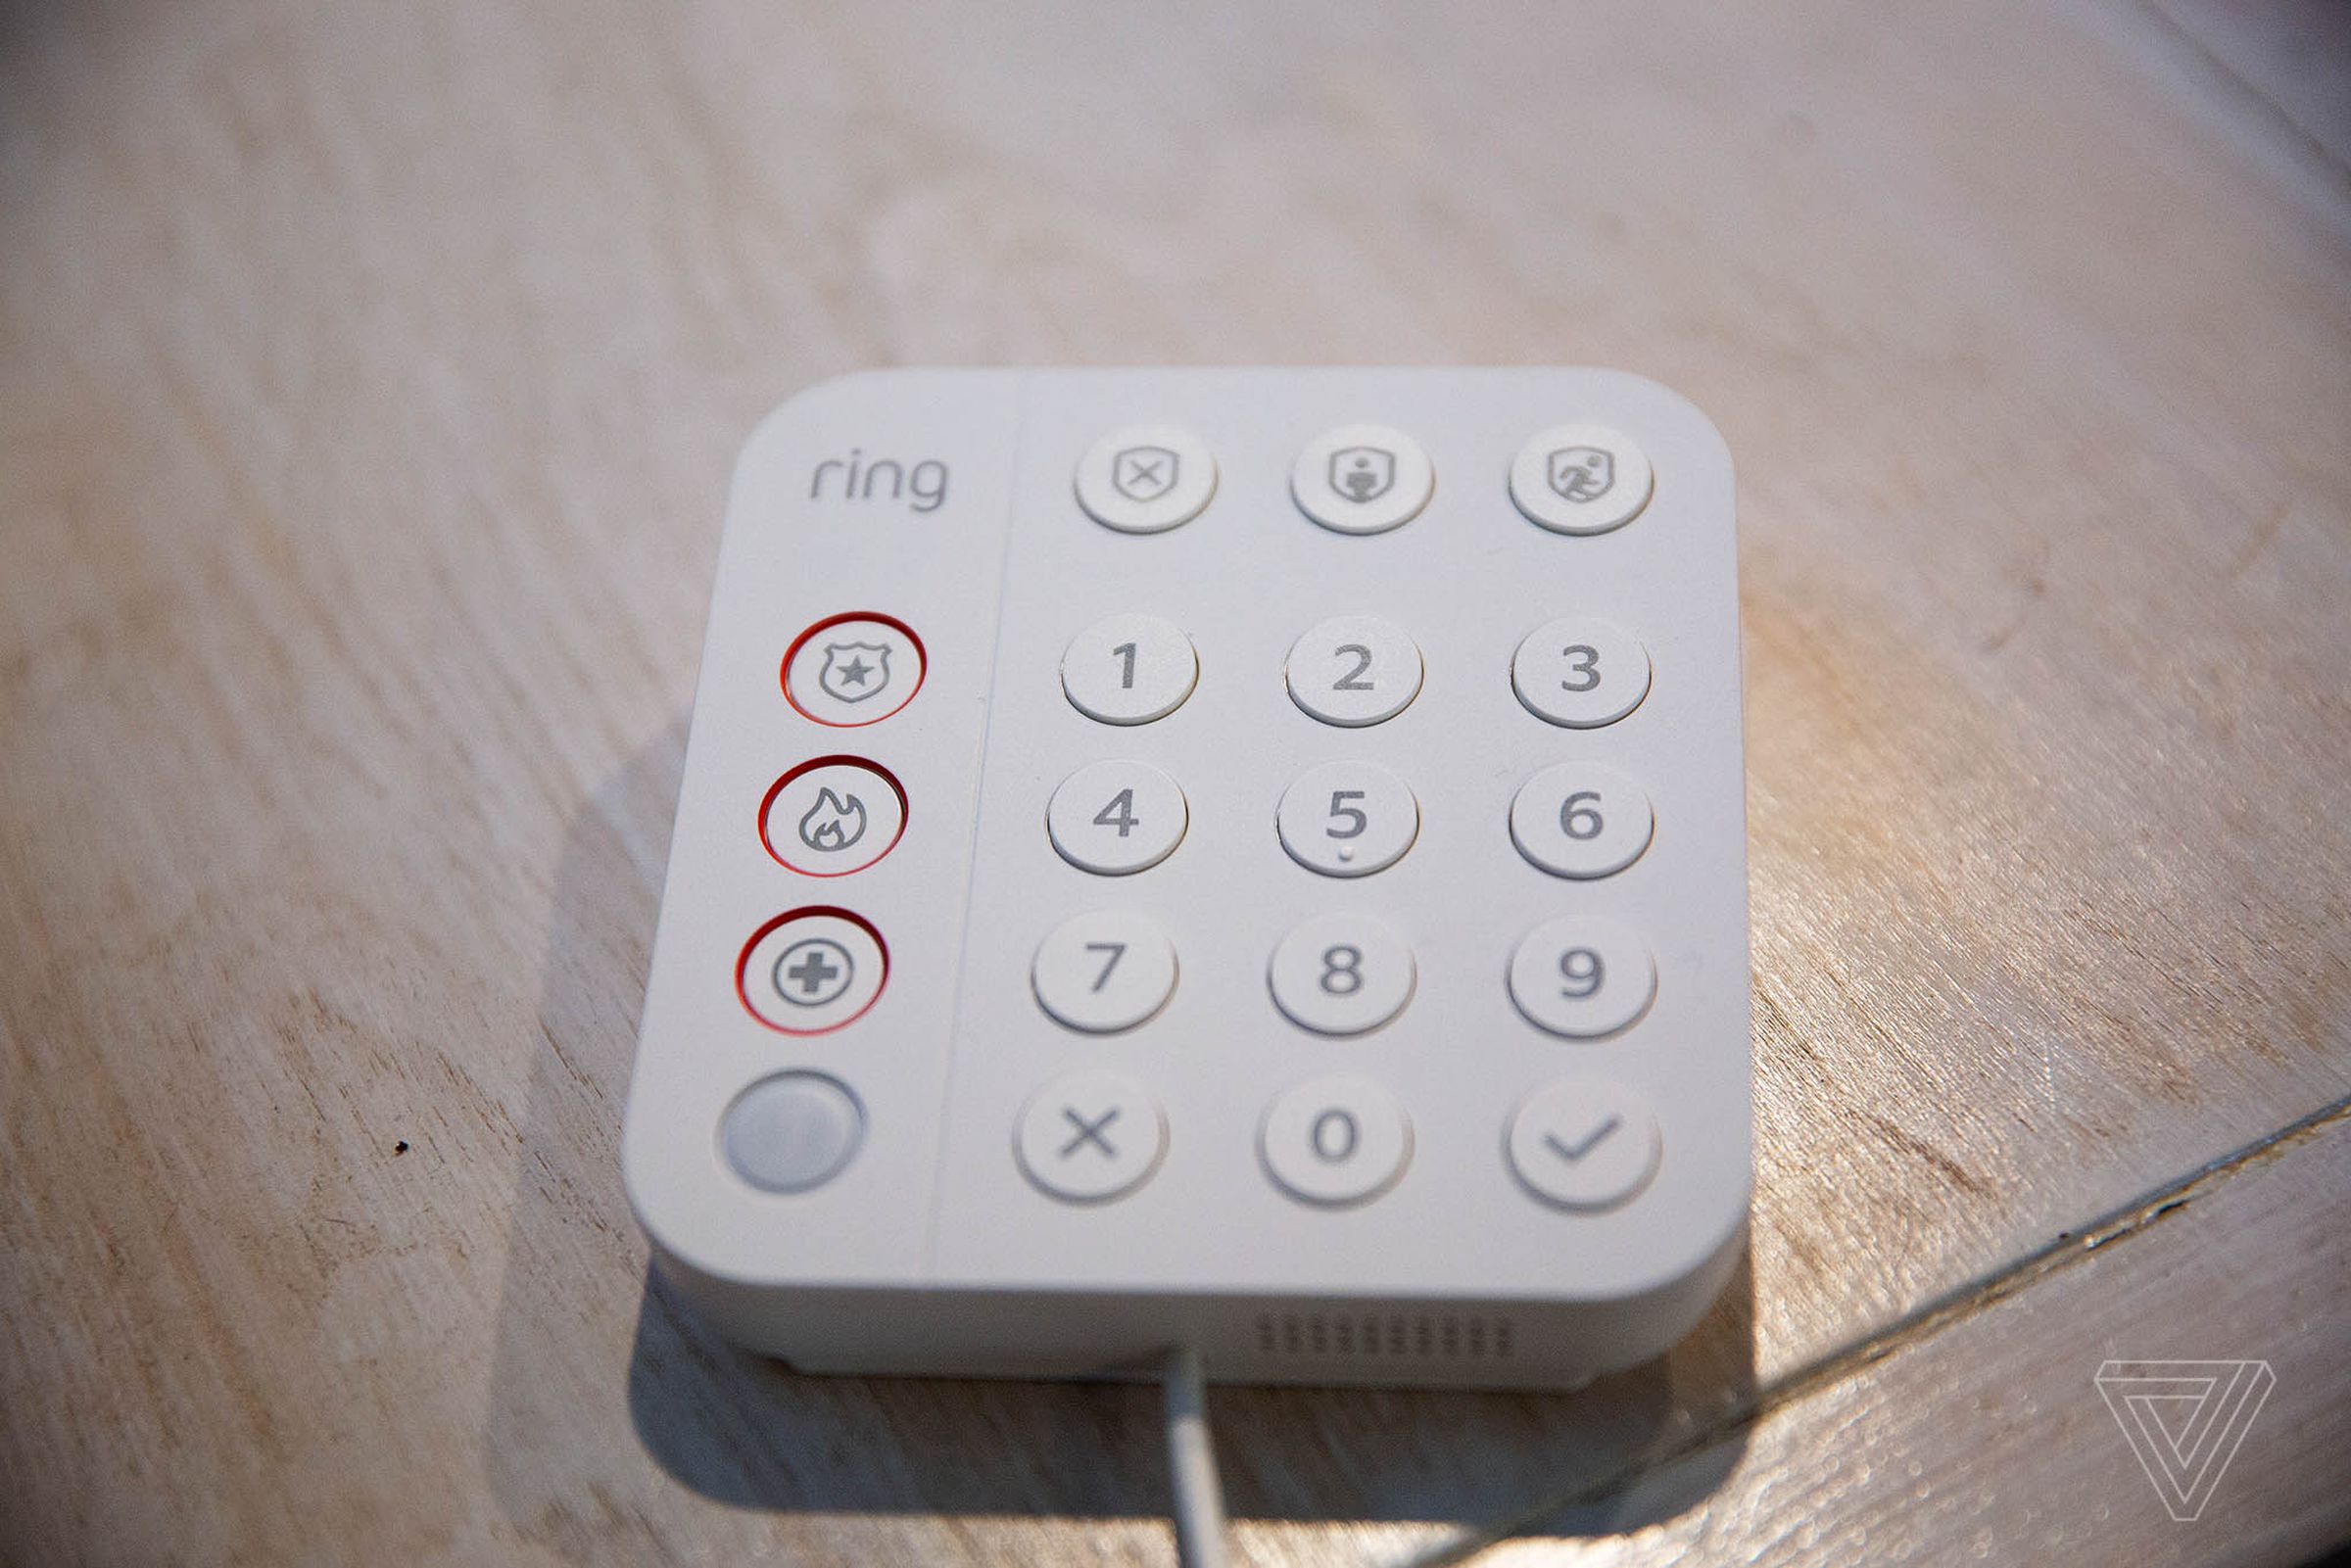 The keypad lets you arm and disarm without the app, you can add multiple keypads to the system.